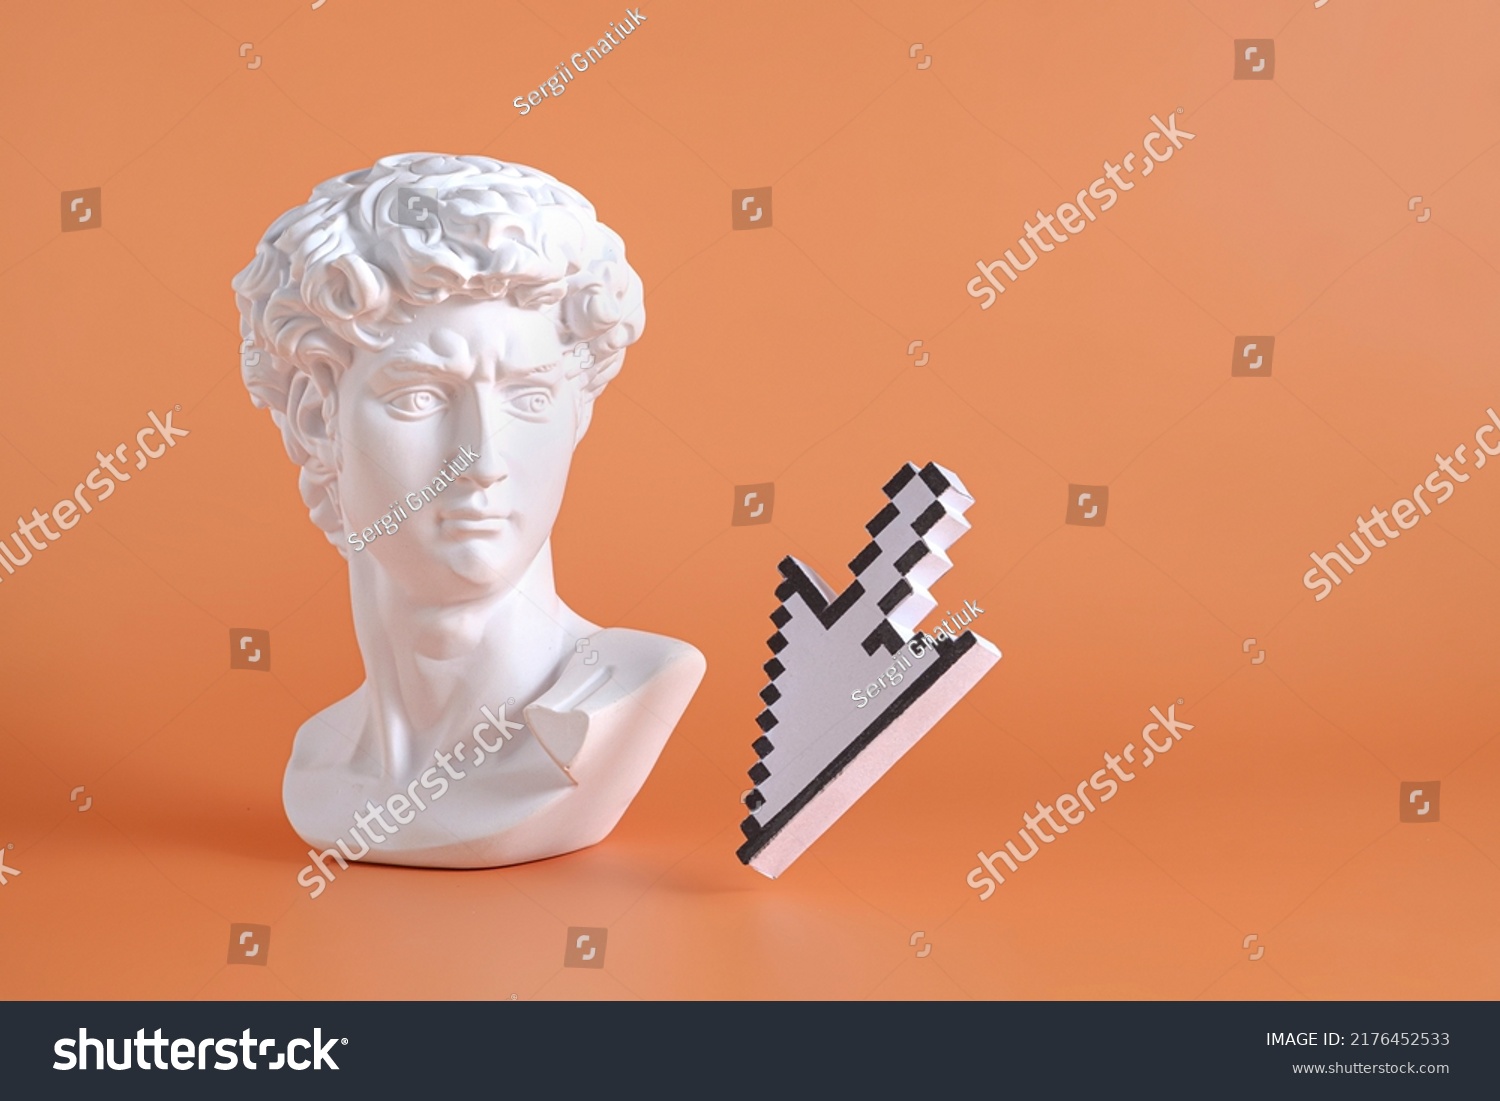 Sculpture head and bust of Michelangelo's David along with modern internet and web technologies pixel pointer mouse cursor. Minimal vaporwave pop concept. #2176452533